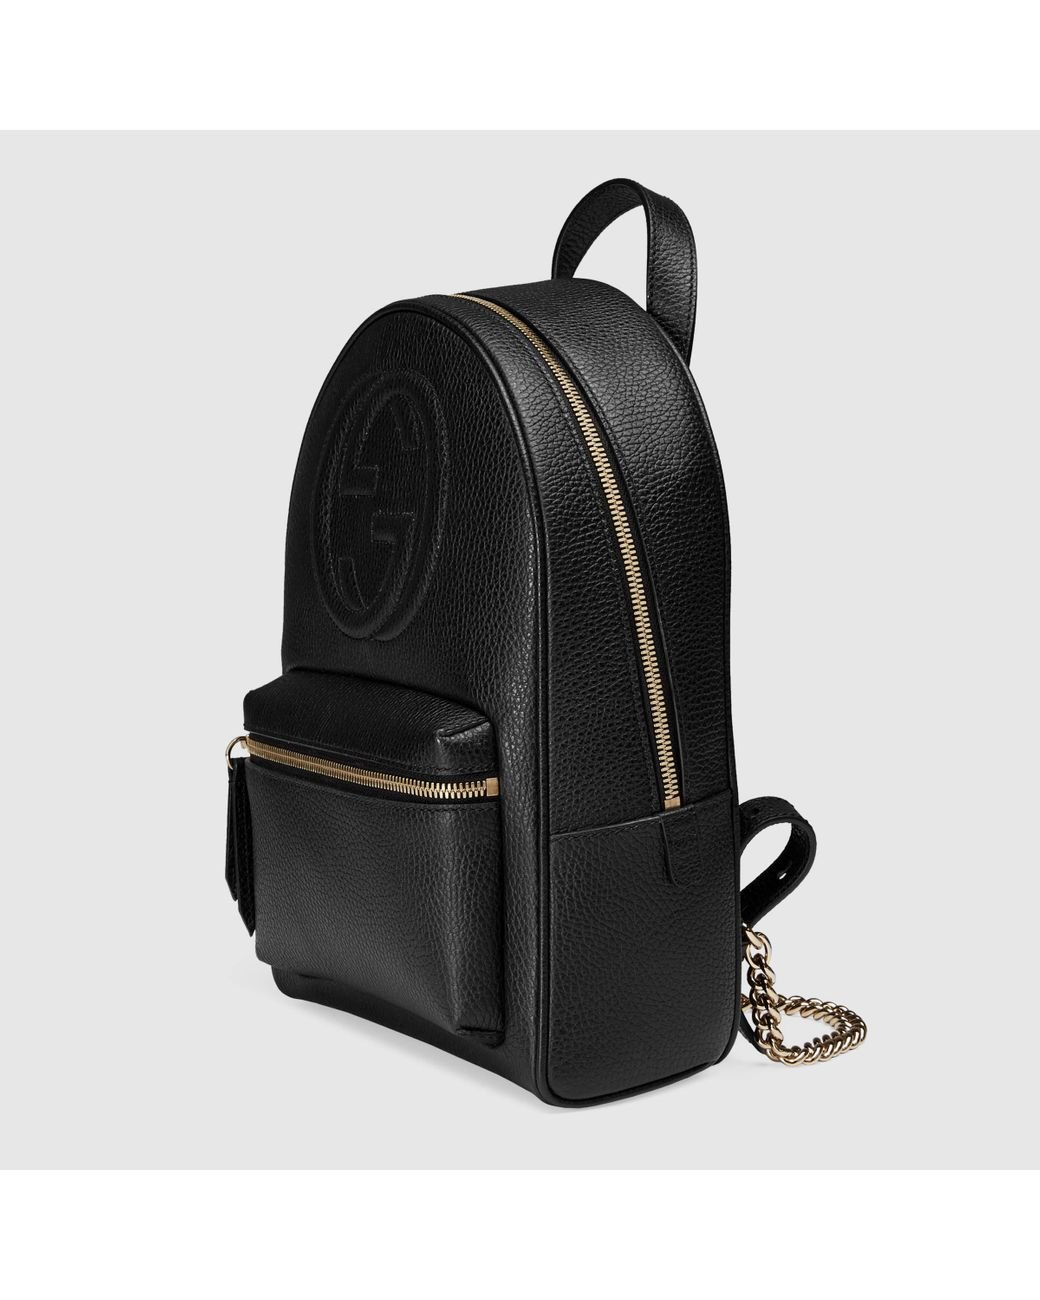 Gucci Soho Leather Chain Backpack in Black